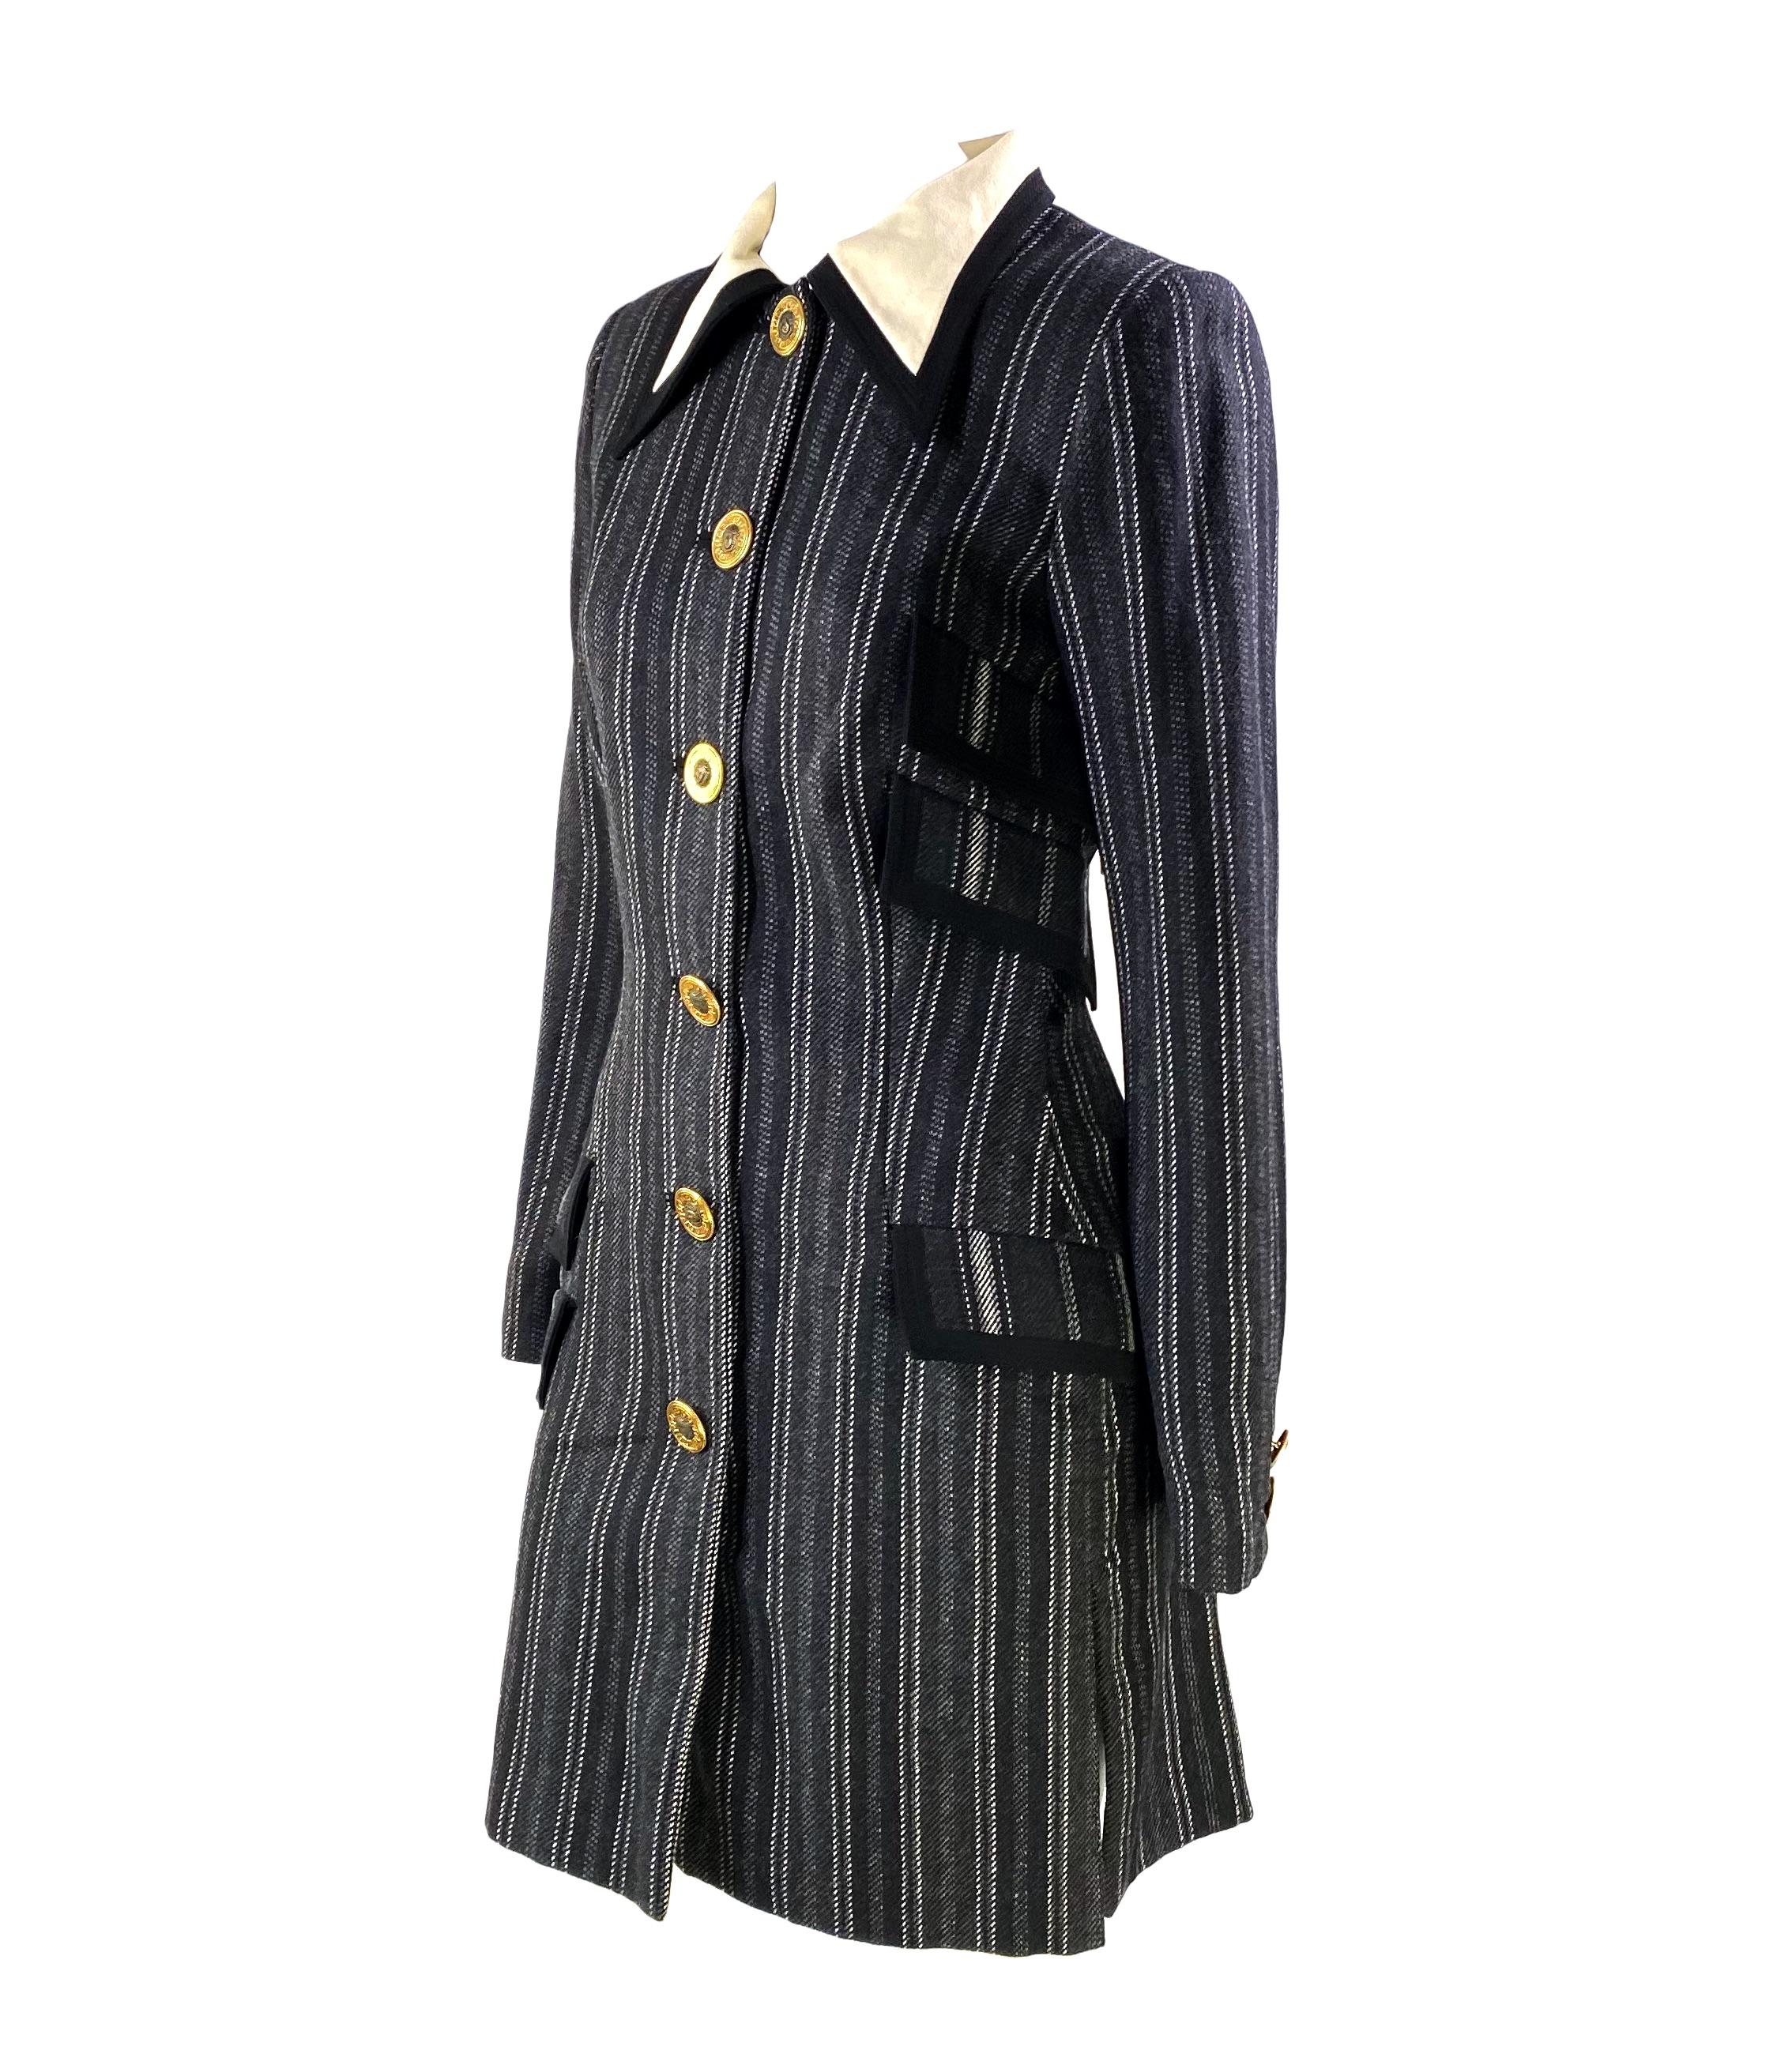 Presenting a collared dress coat designed by Gianni Versace for his Fall/Winter 1993 collection. The collection is remembered for its grunge-glamour aesthetic. This piece features gold Medusa buttons down the center and at each cuff. The lower